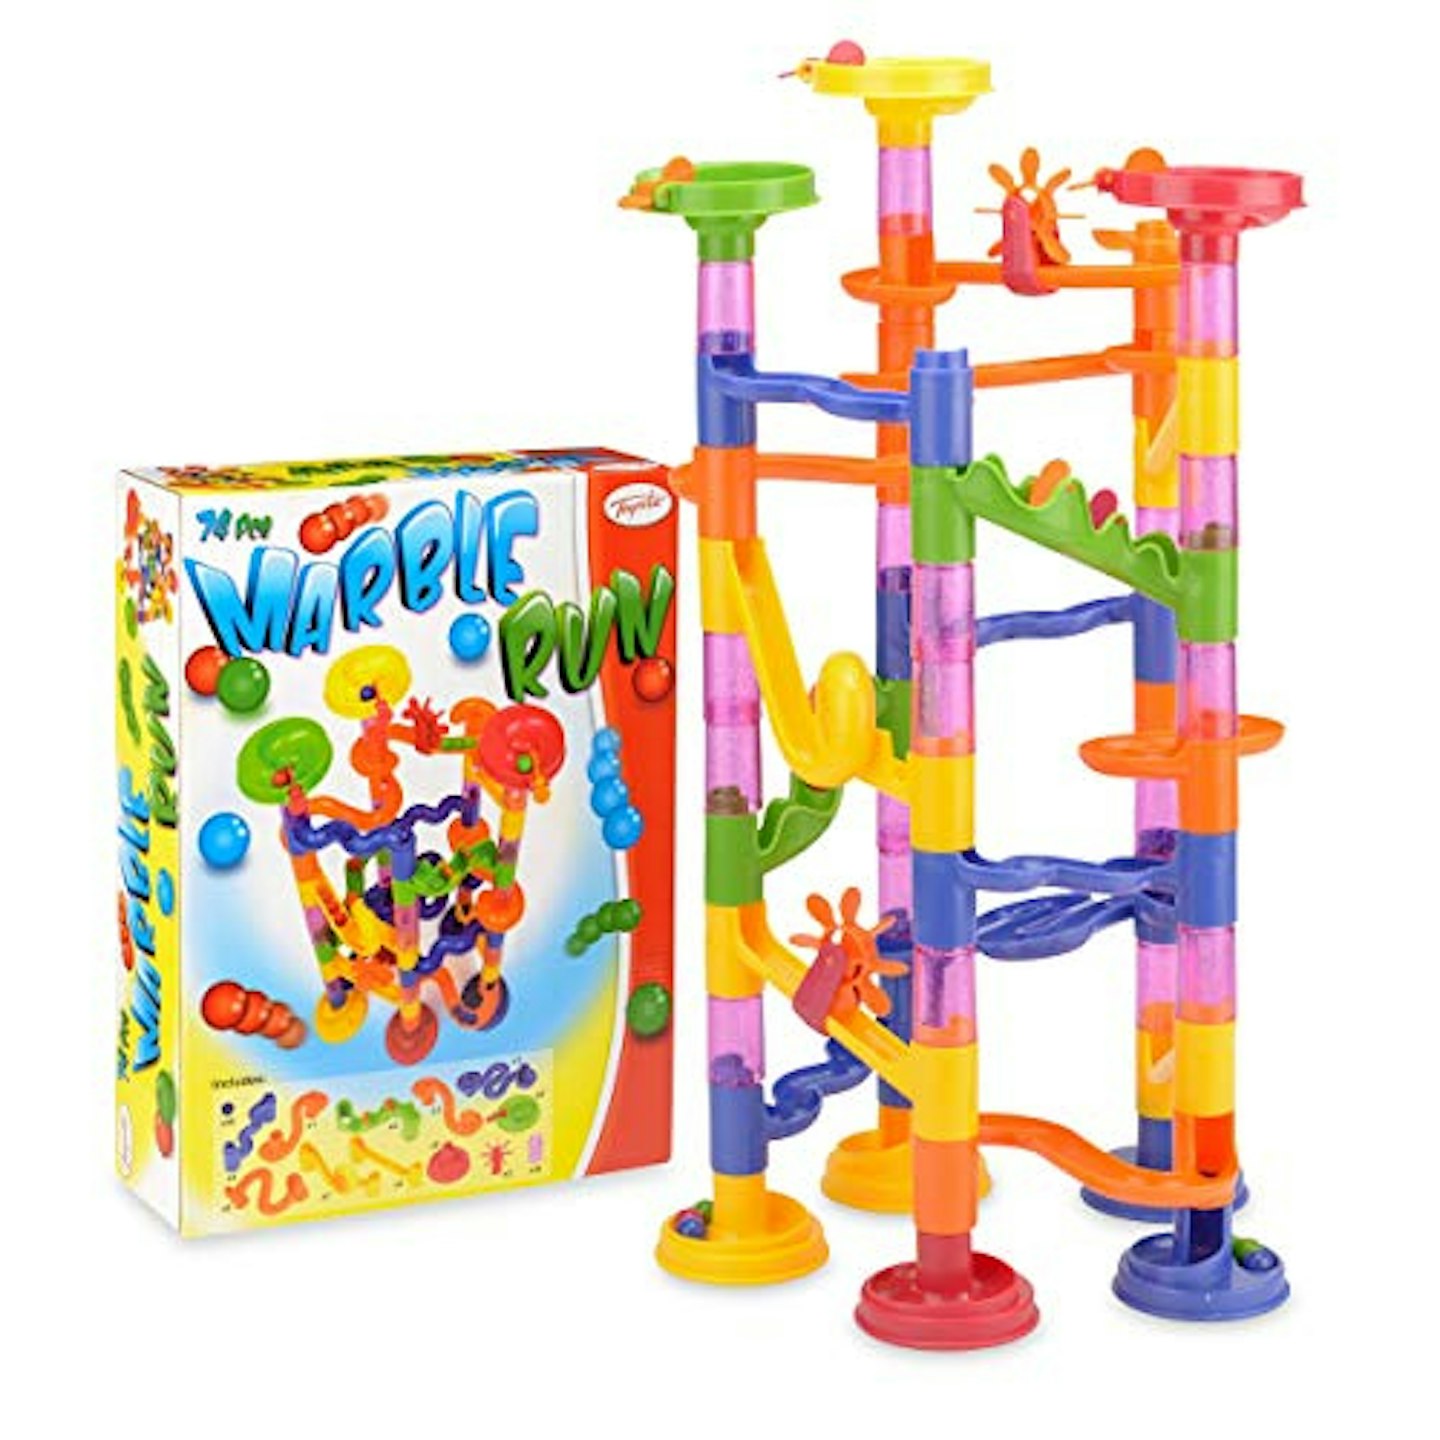 The best all-rounder toy for toddlers aged 4 and above: Marble race game